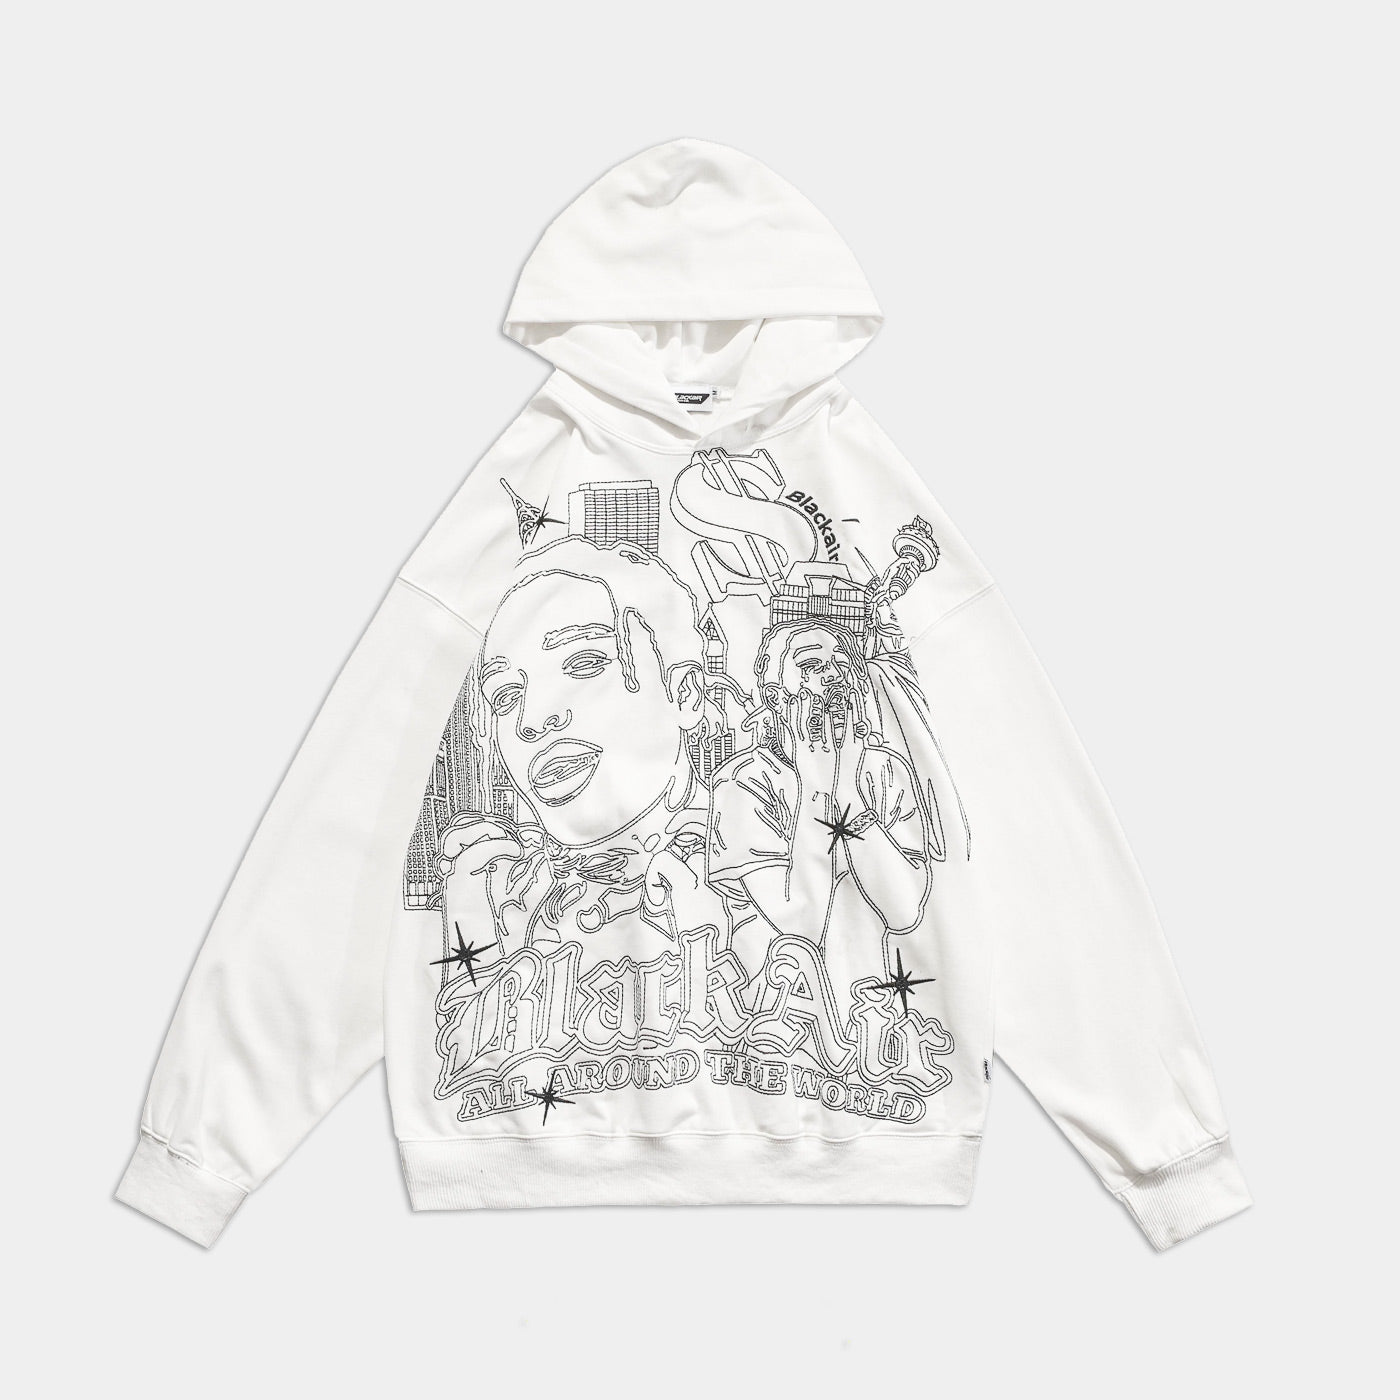 Embroidery Astroworld Hoody